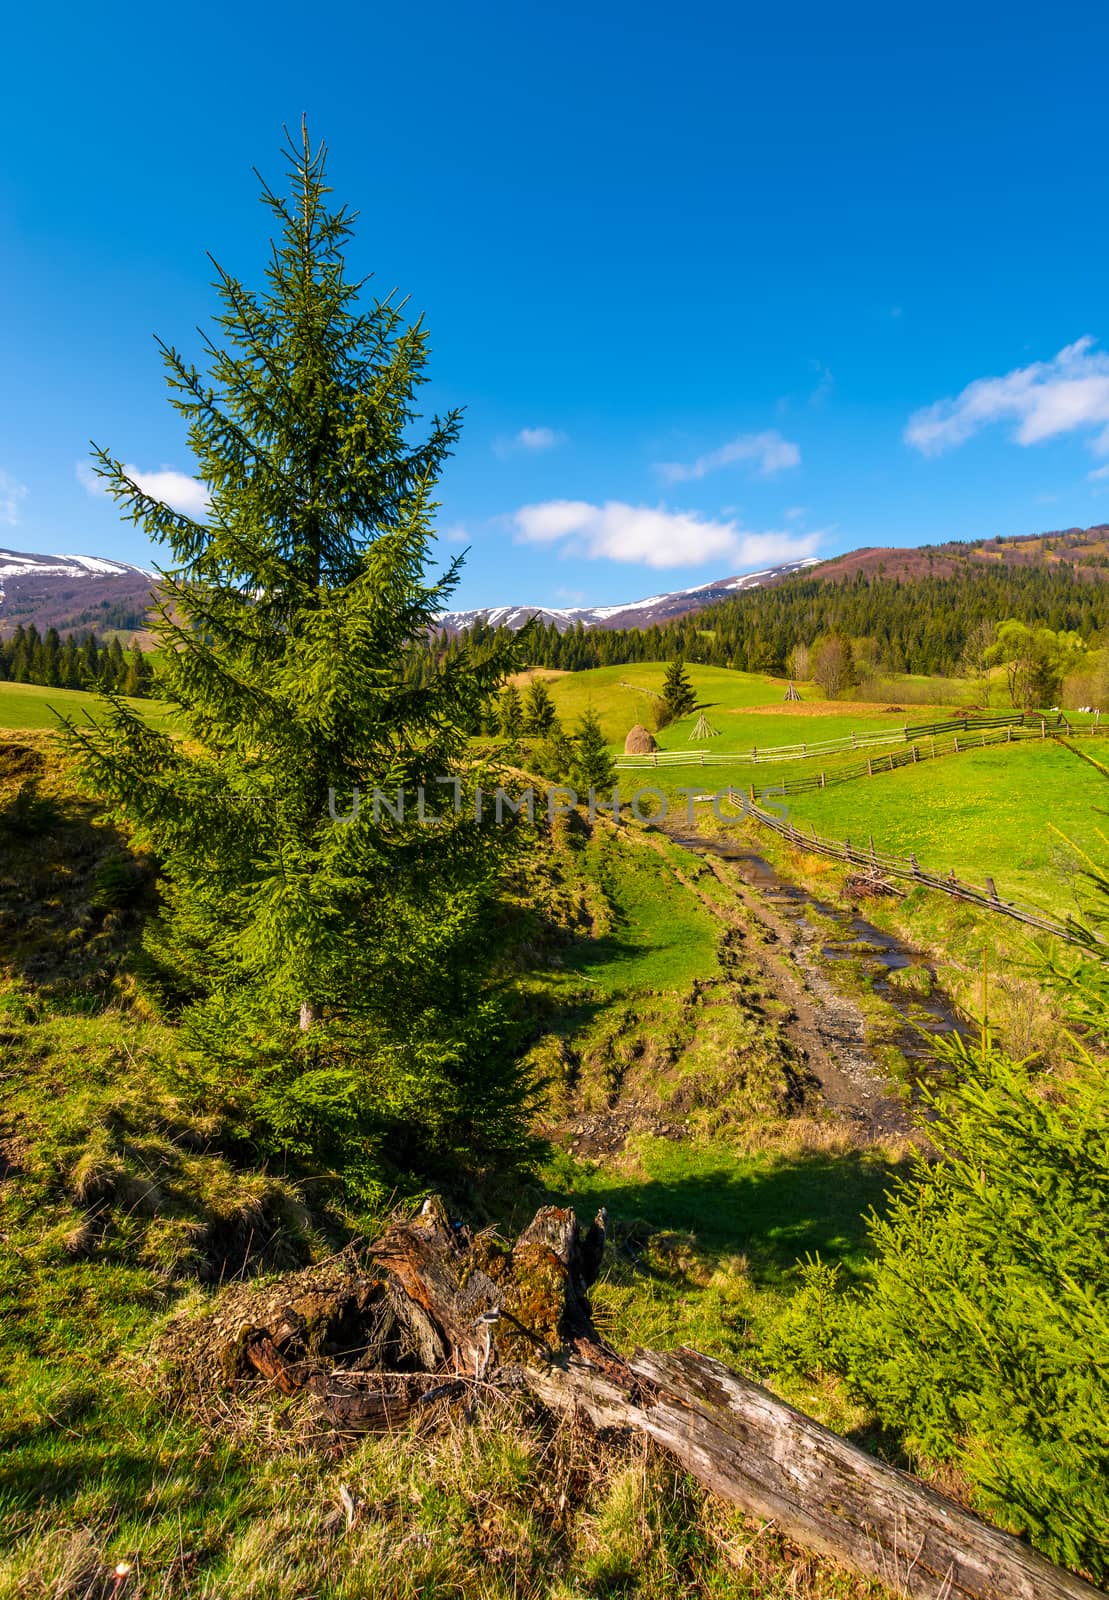 spruce trees over the grassy slope by Pellinni